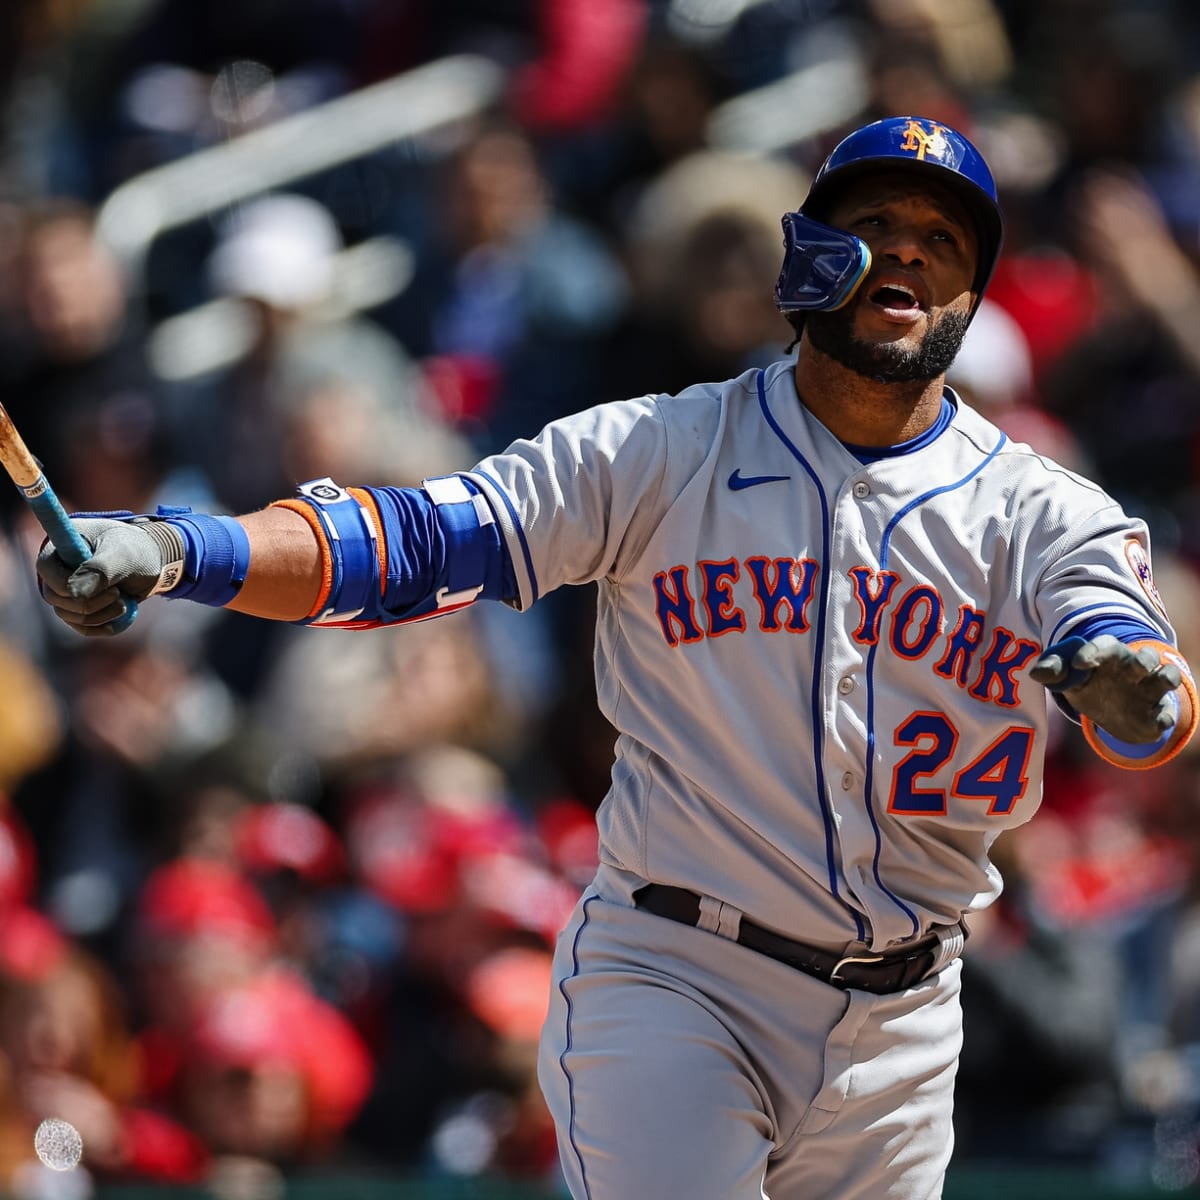 Robinson Cano: a 16-year veteran caught cheating for the second